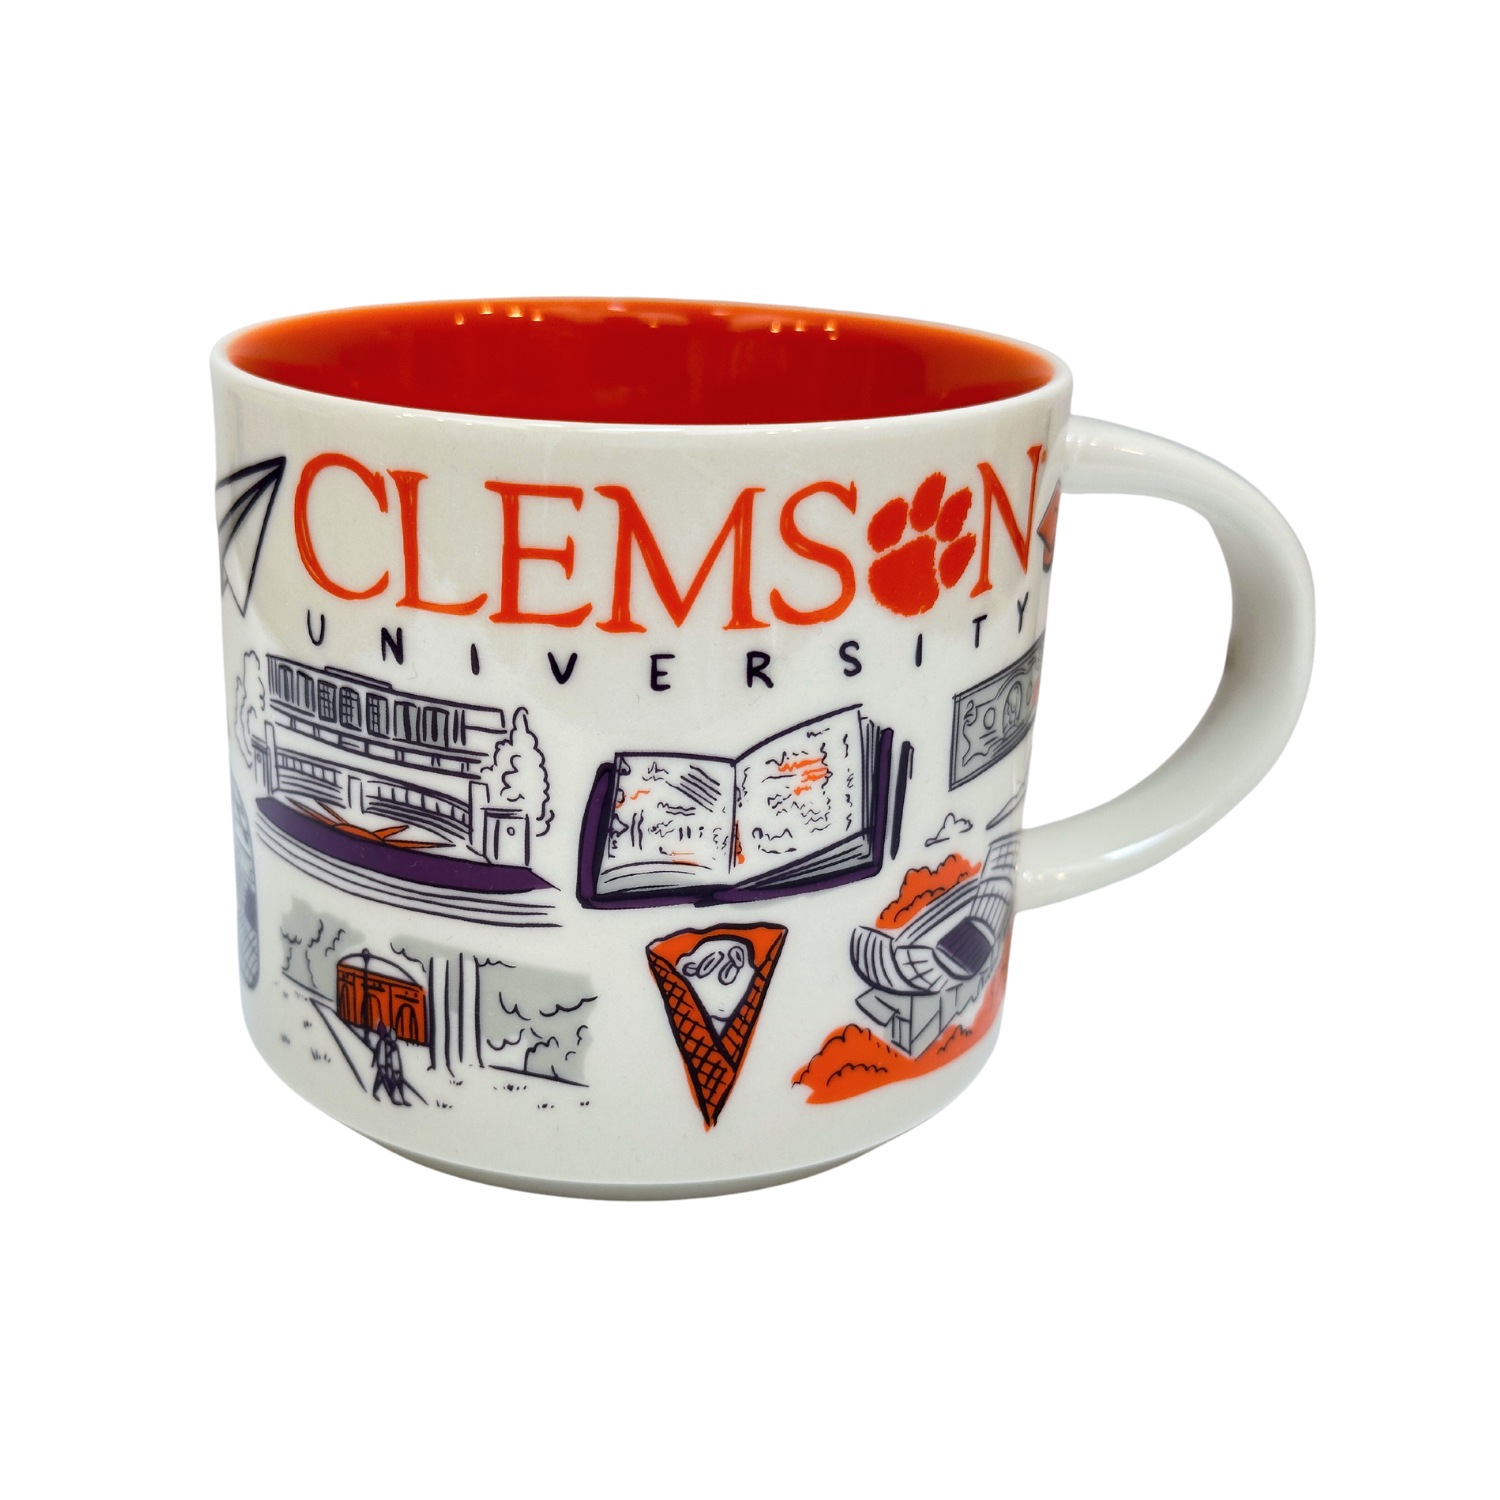 Starbucks Been There Series Campus Collection Clemson University Ceramic Coffee Mug, 14 Oz